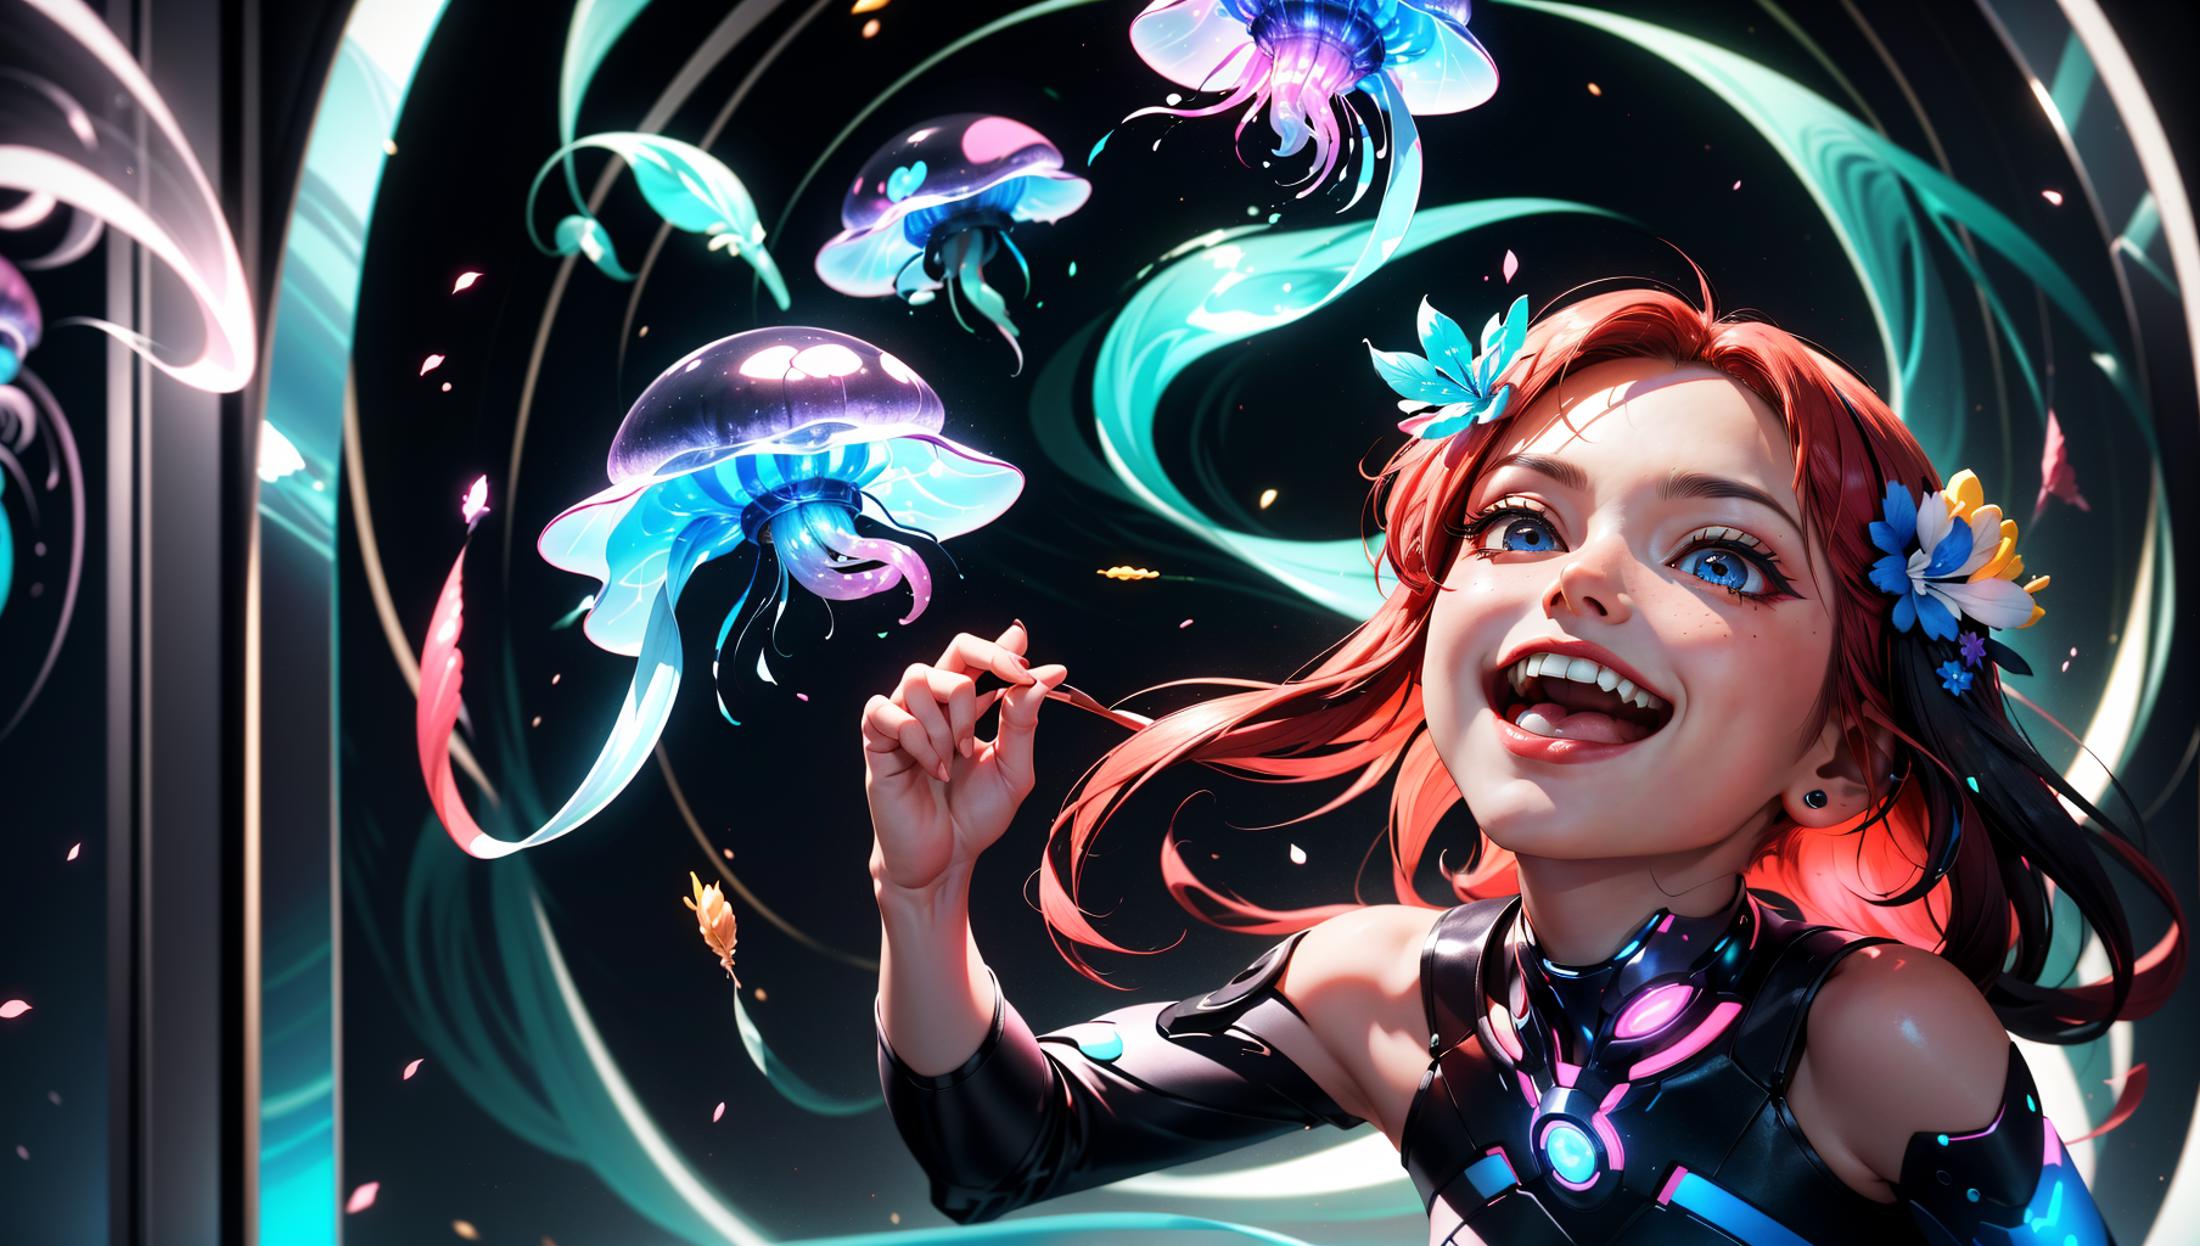 A Smiling Cartoon Girl with Pink Hair Brushing Her Teeth in Front of Jellyfish and Mushrooms